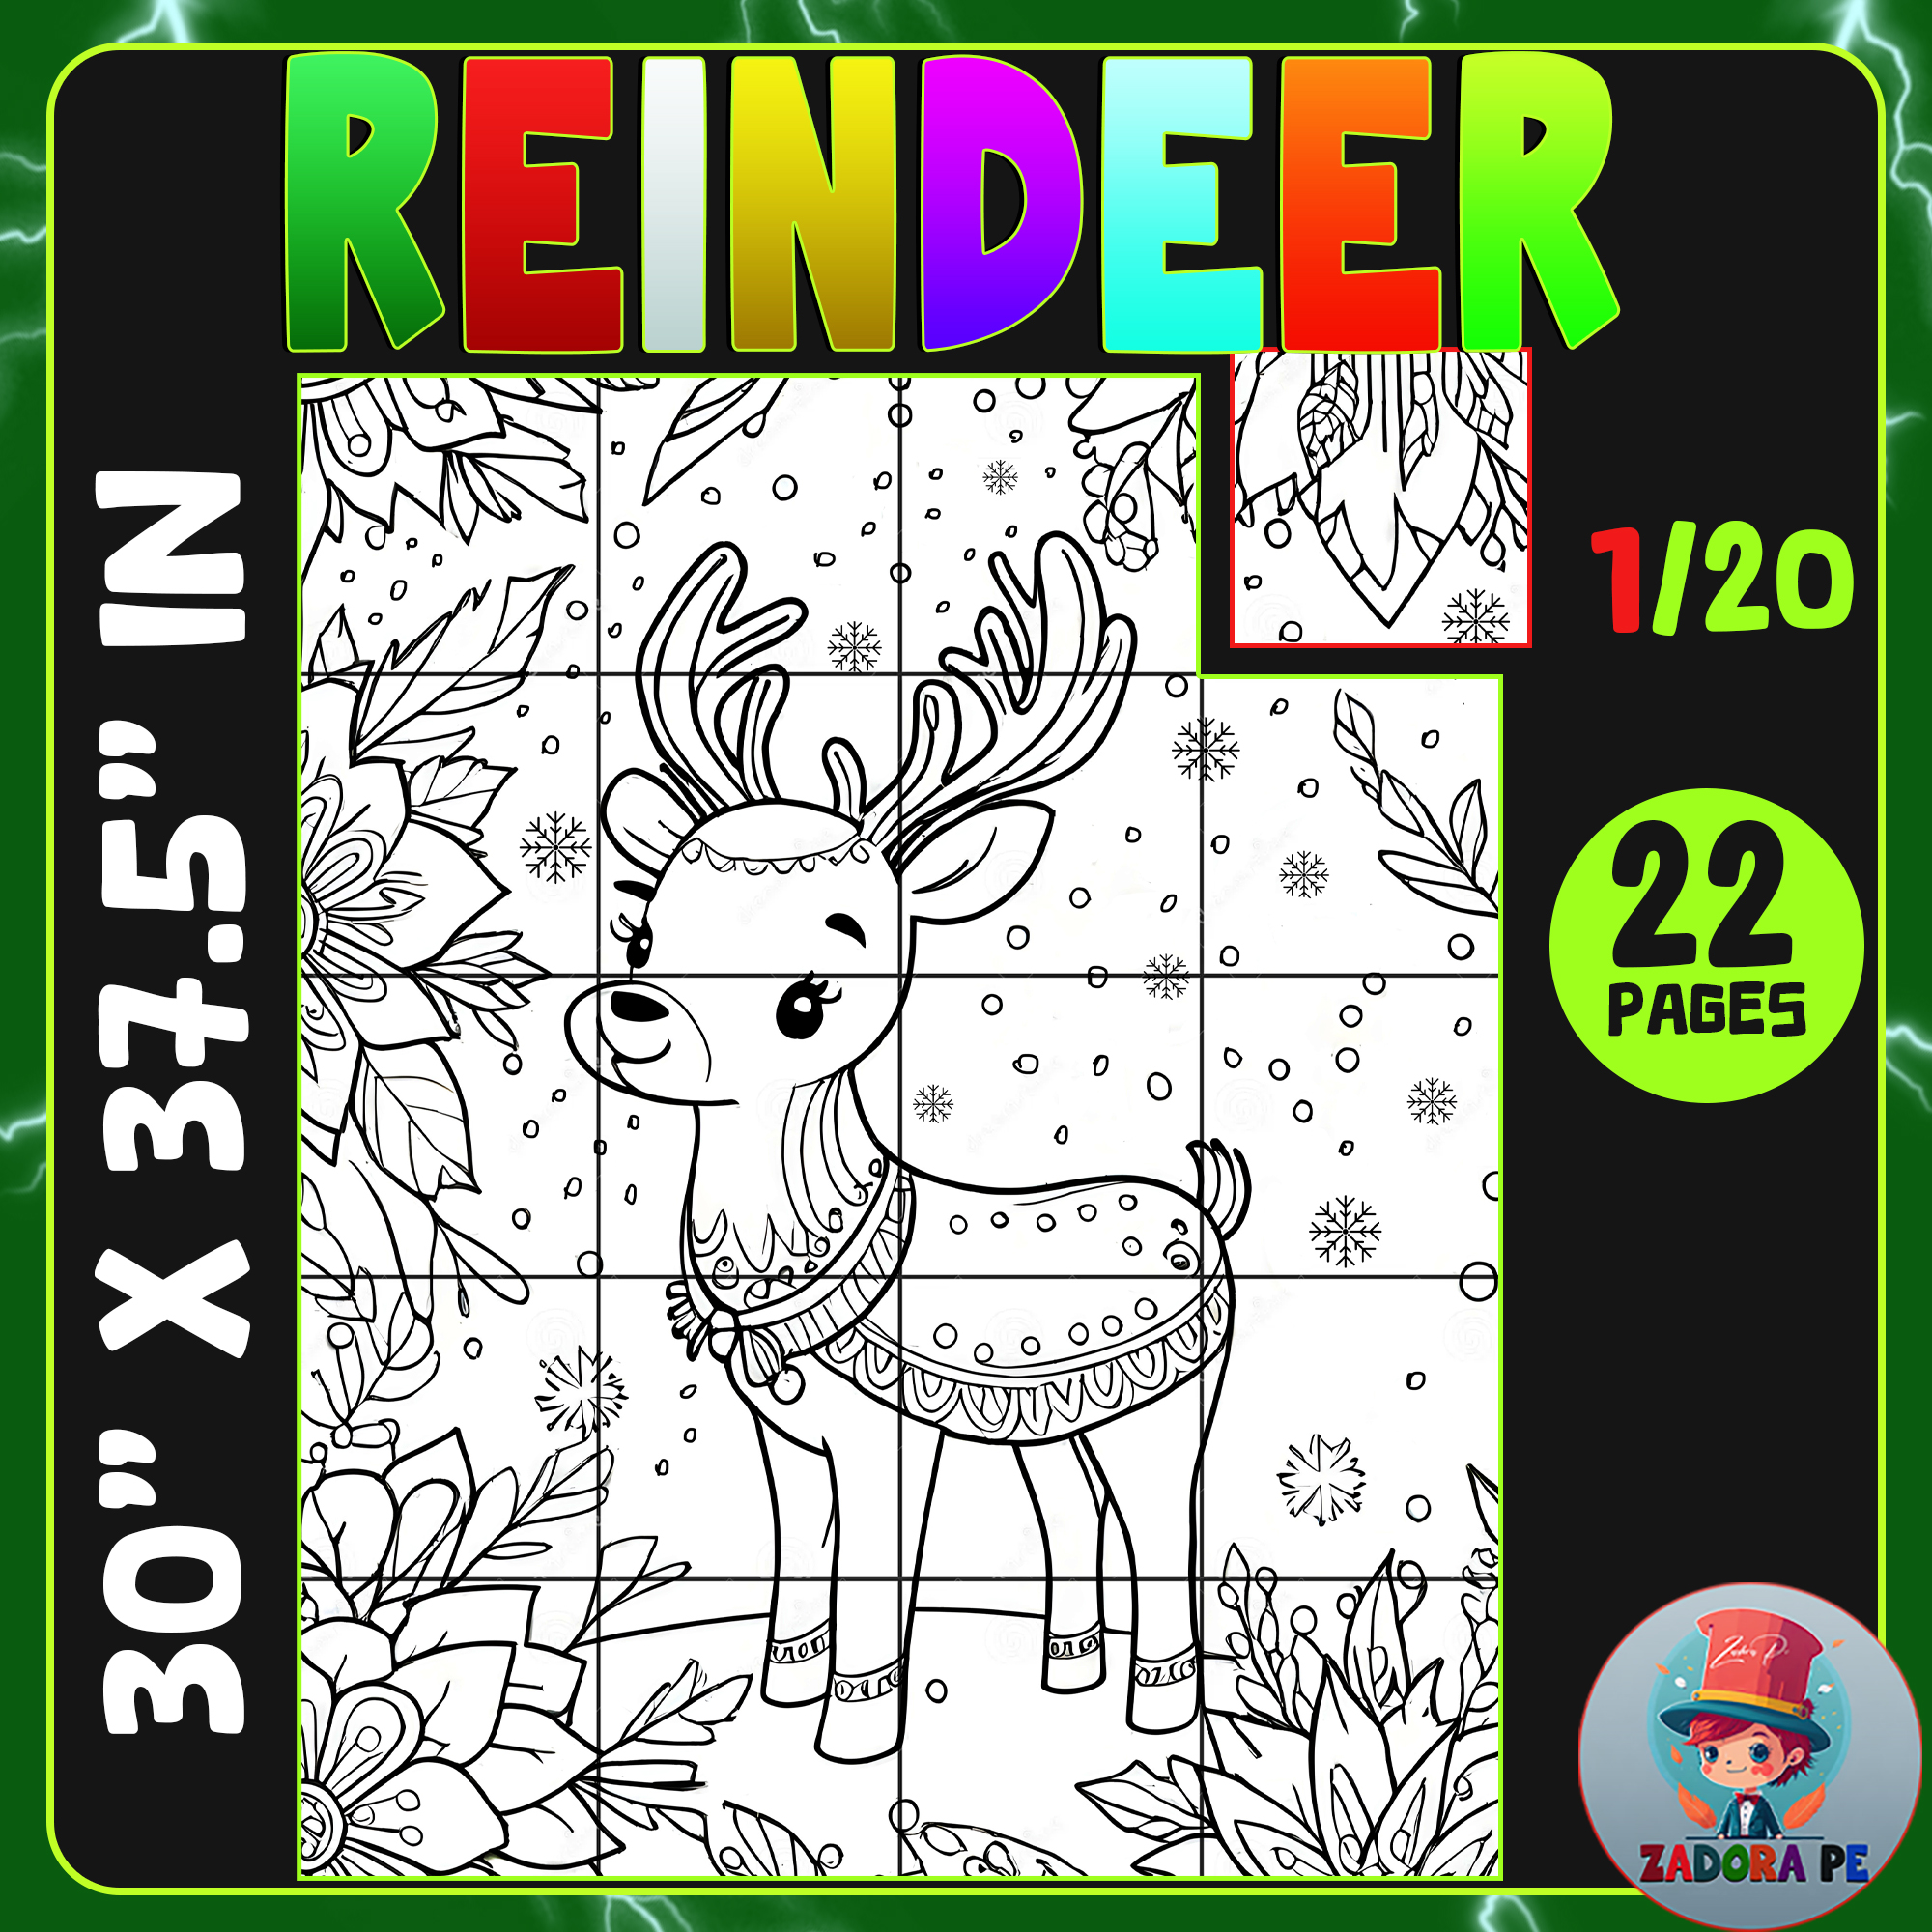 Reindeer radiance christmas collaborative poster art coloring craft winter bulletin board made by teachers